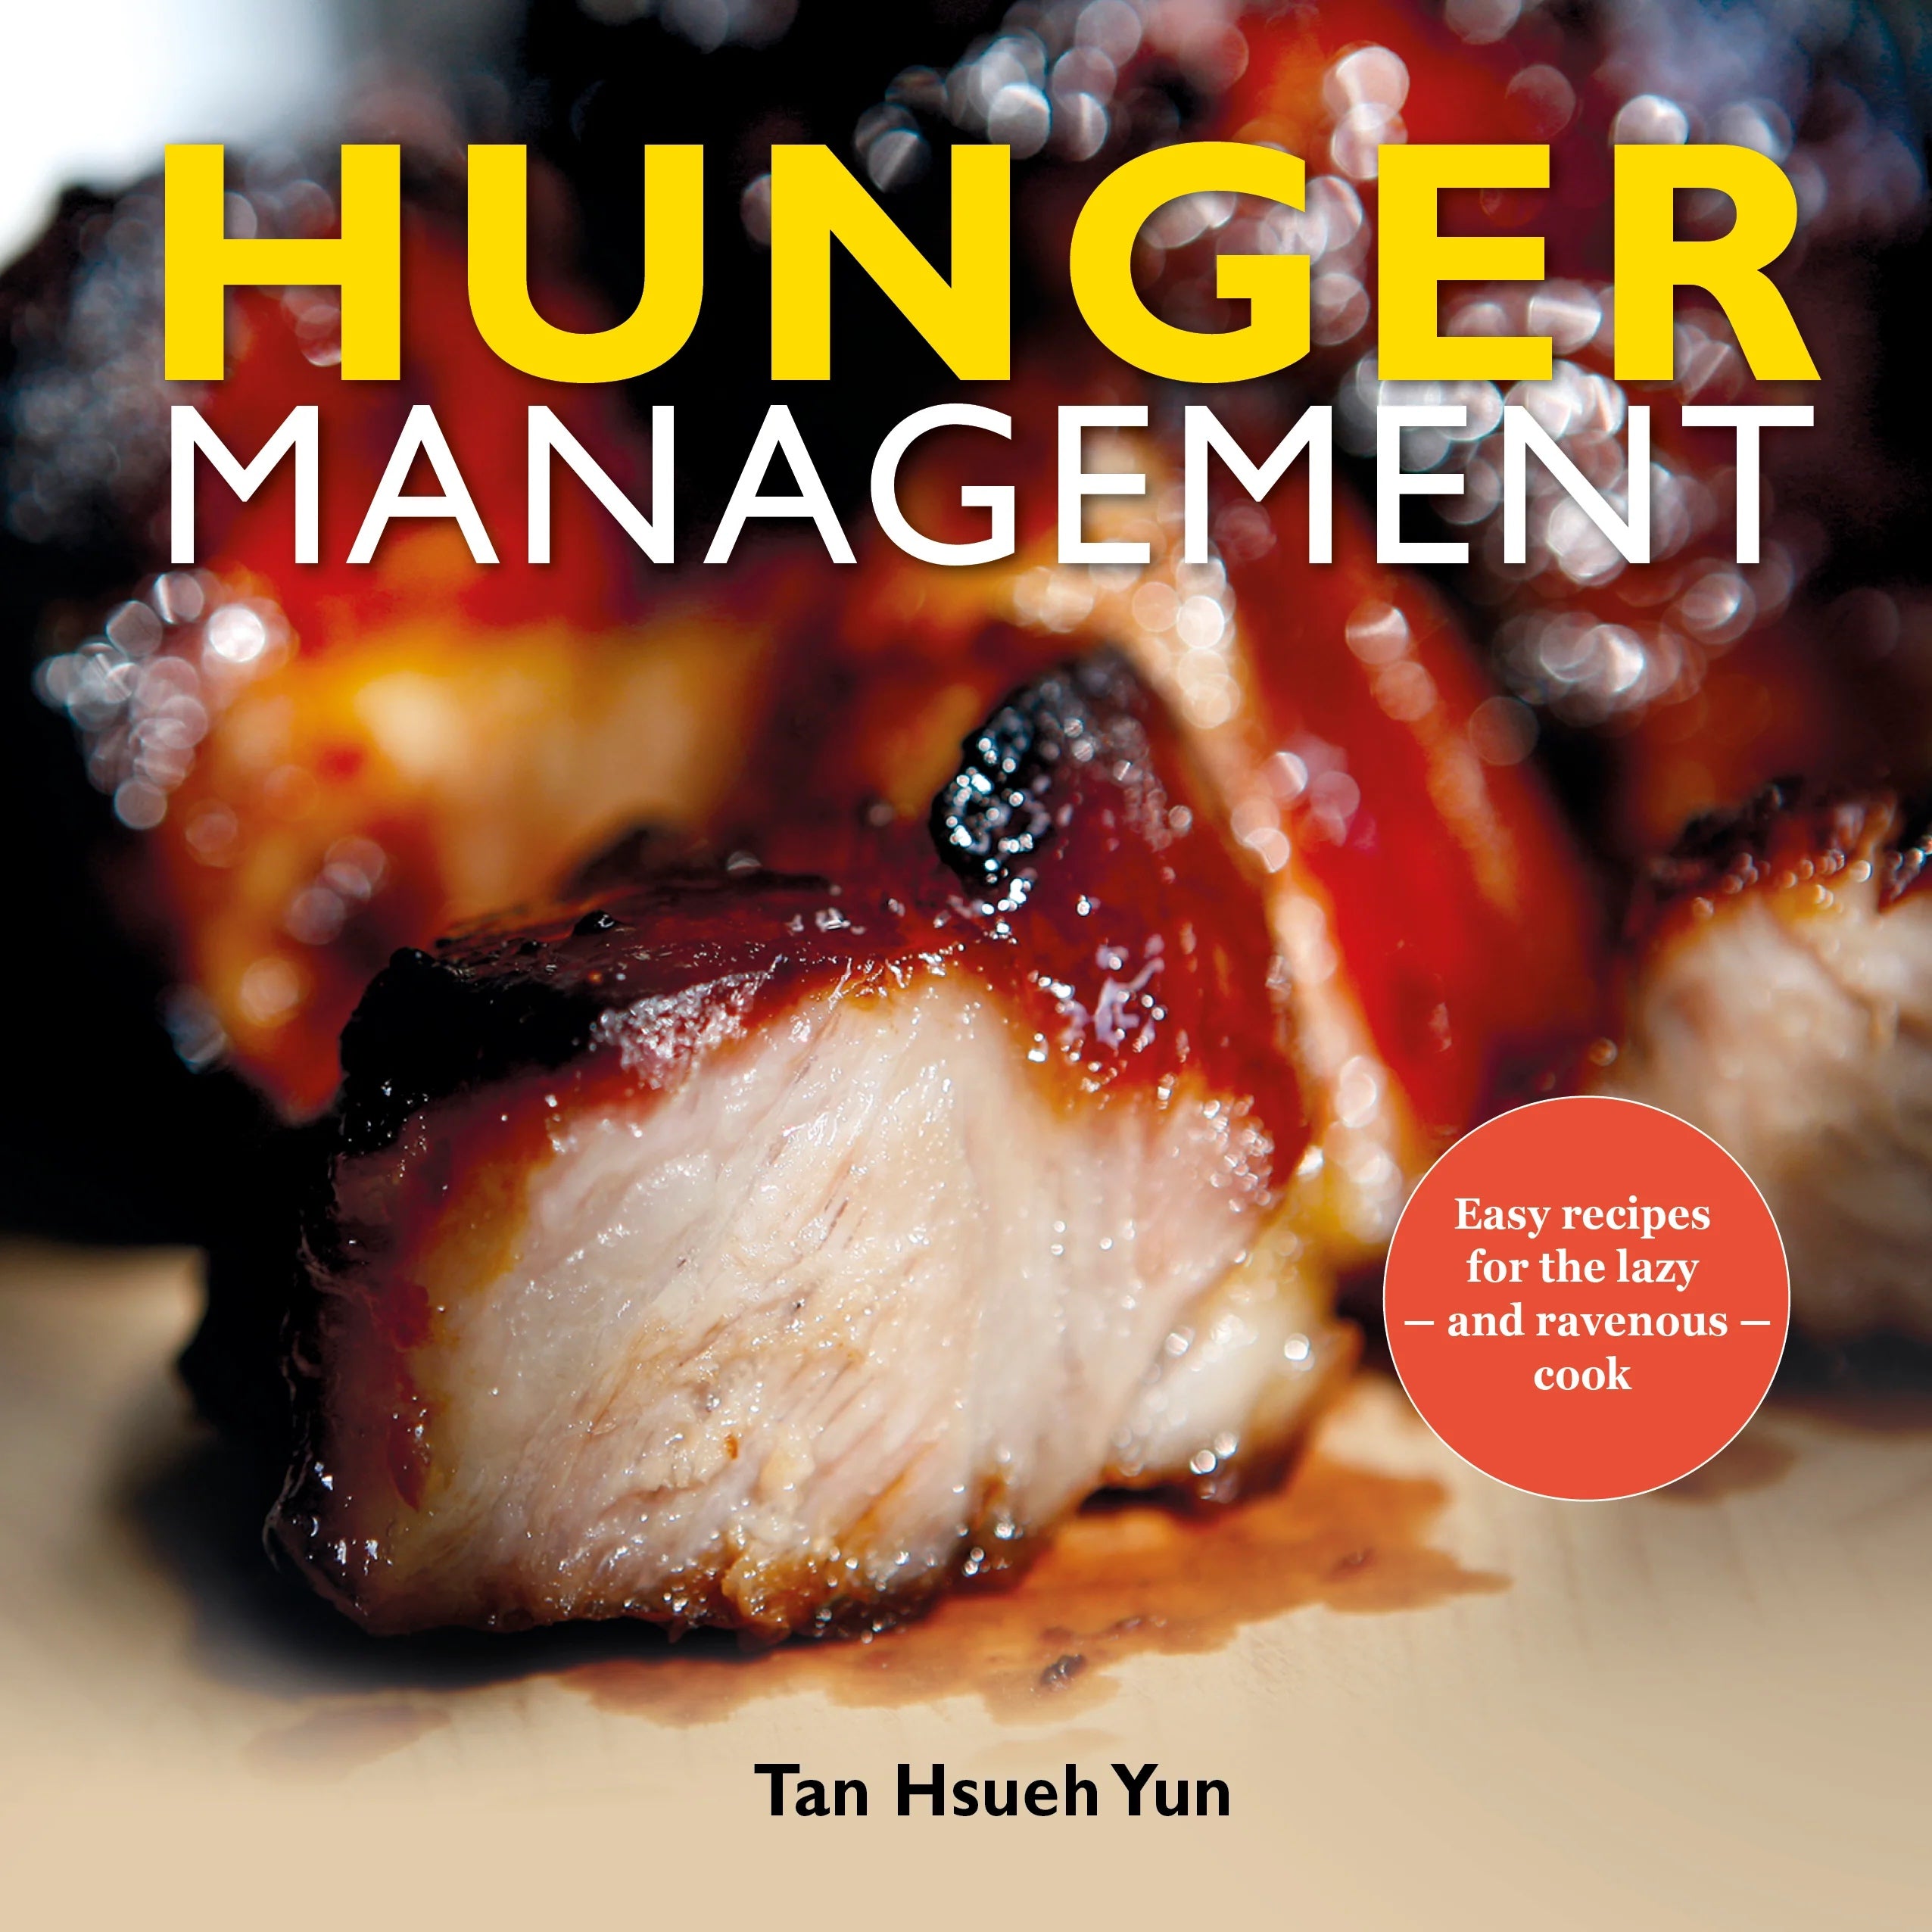 Hunger Management: Easy recipes for the lazy and ravenous cook